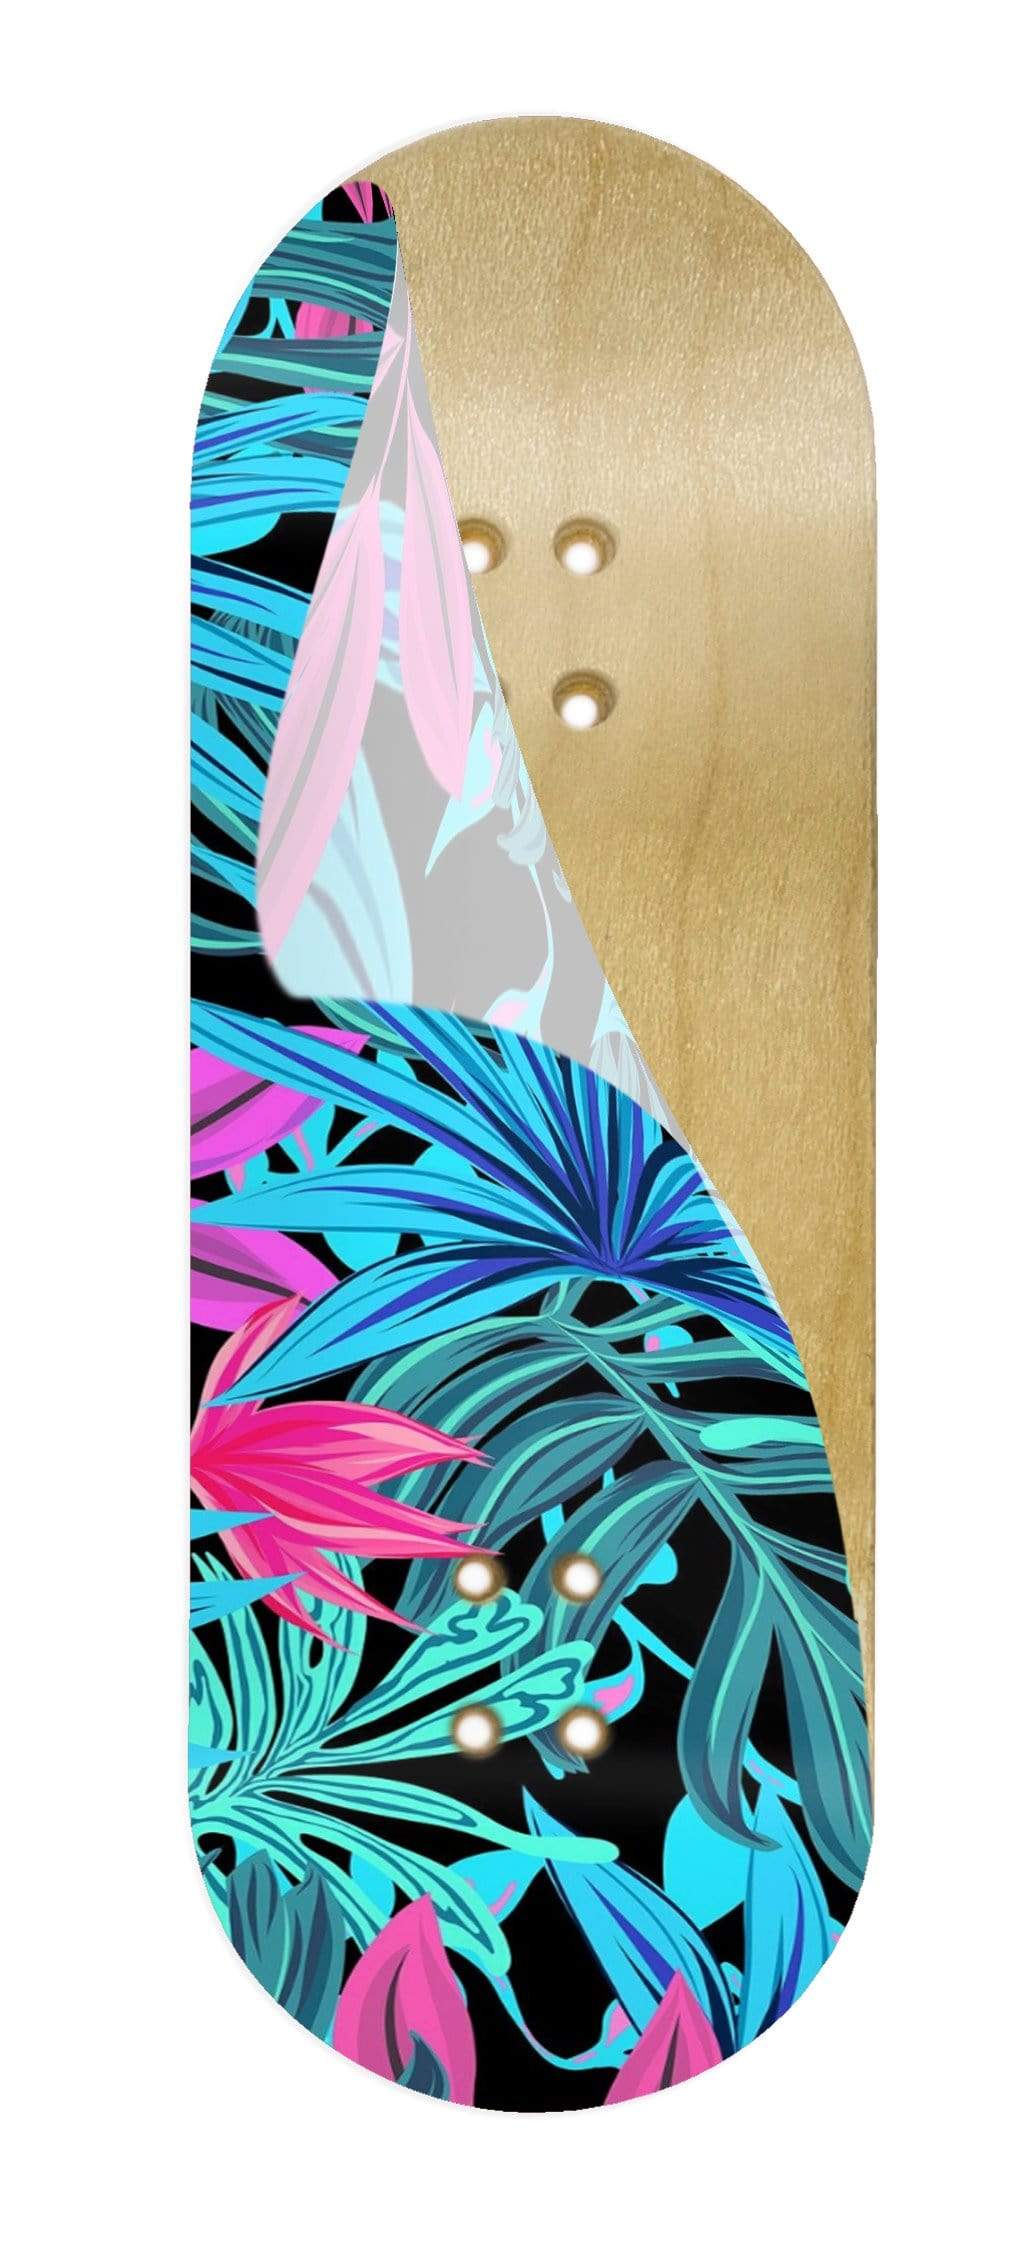 Teak Tuning Limited Edition "Vibrant Leaves" Deck Graphic Wrap - 35mm x 110mm